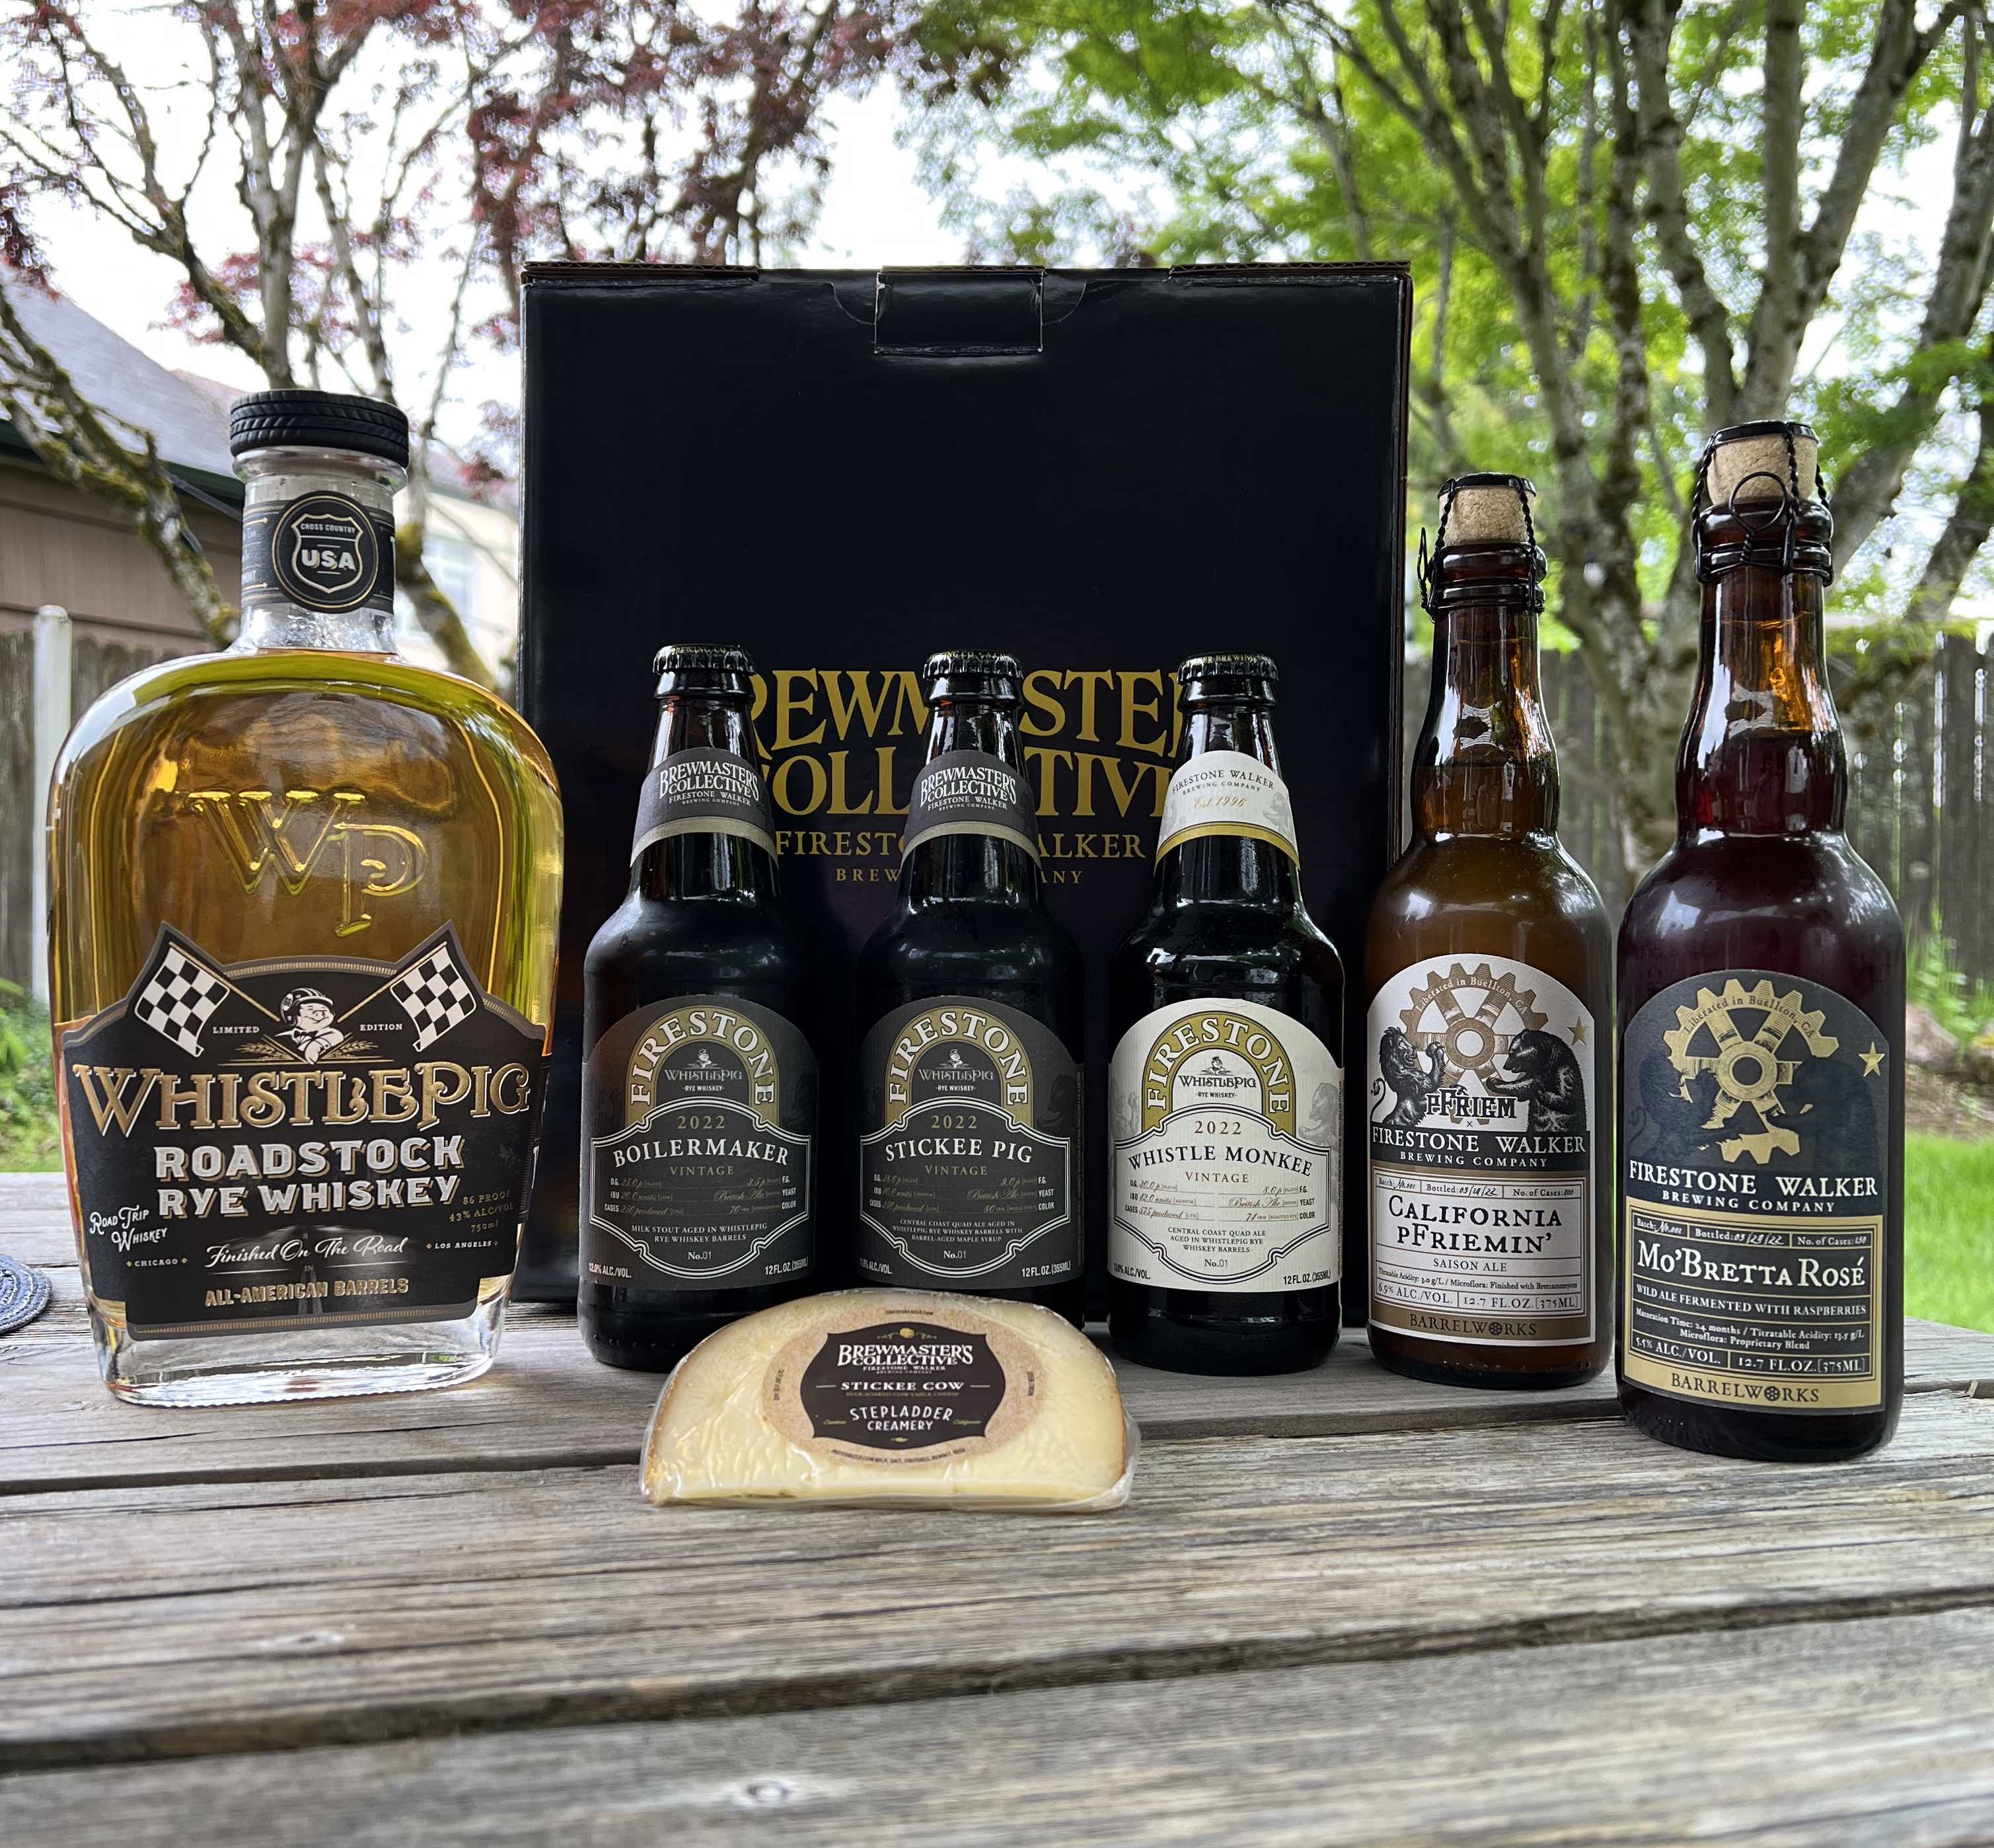 Firestone Walker's Brewmaster’s Collective - The Farmstead Collection that includes three barrel-aged beers aged in WhistlePig barrels.